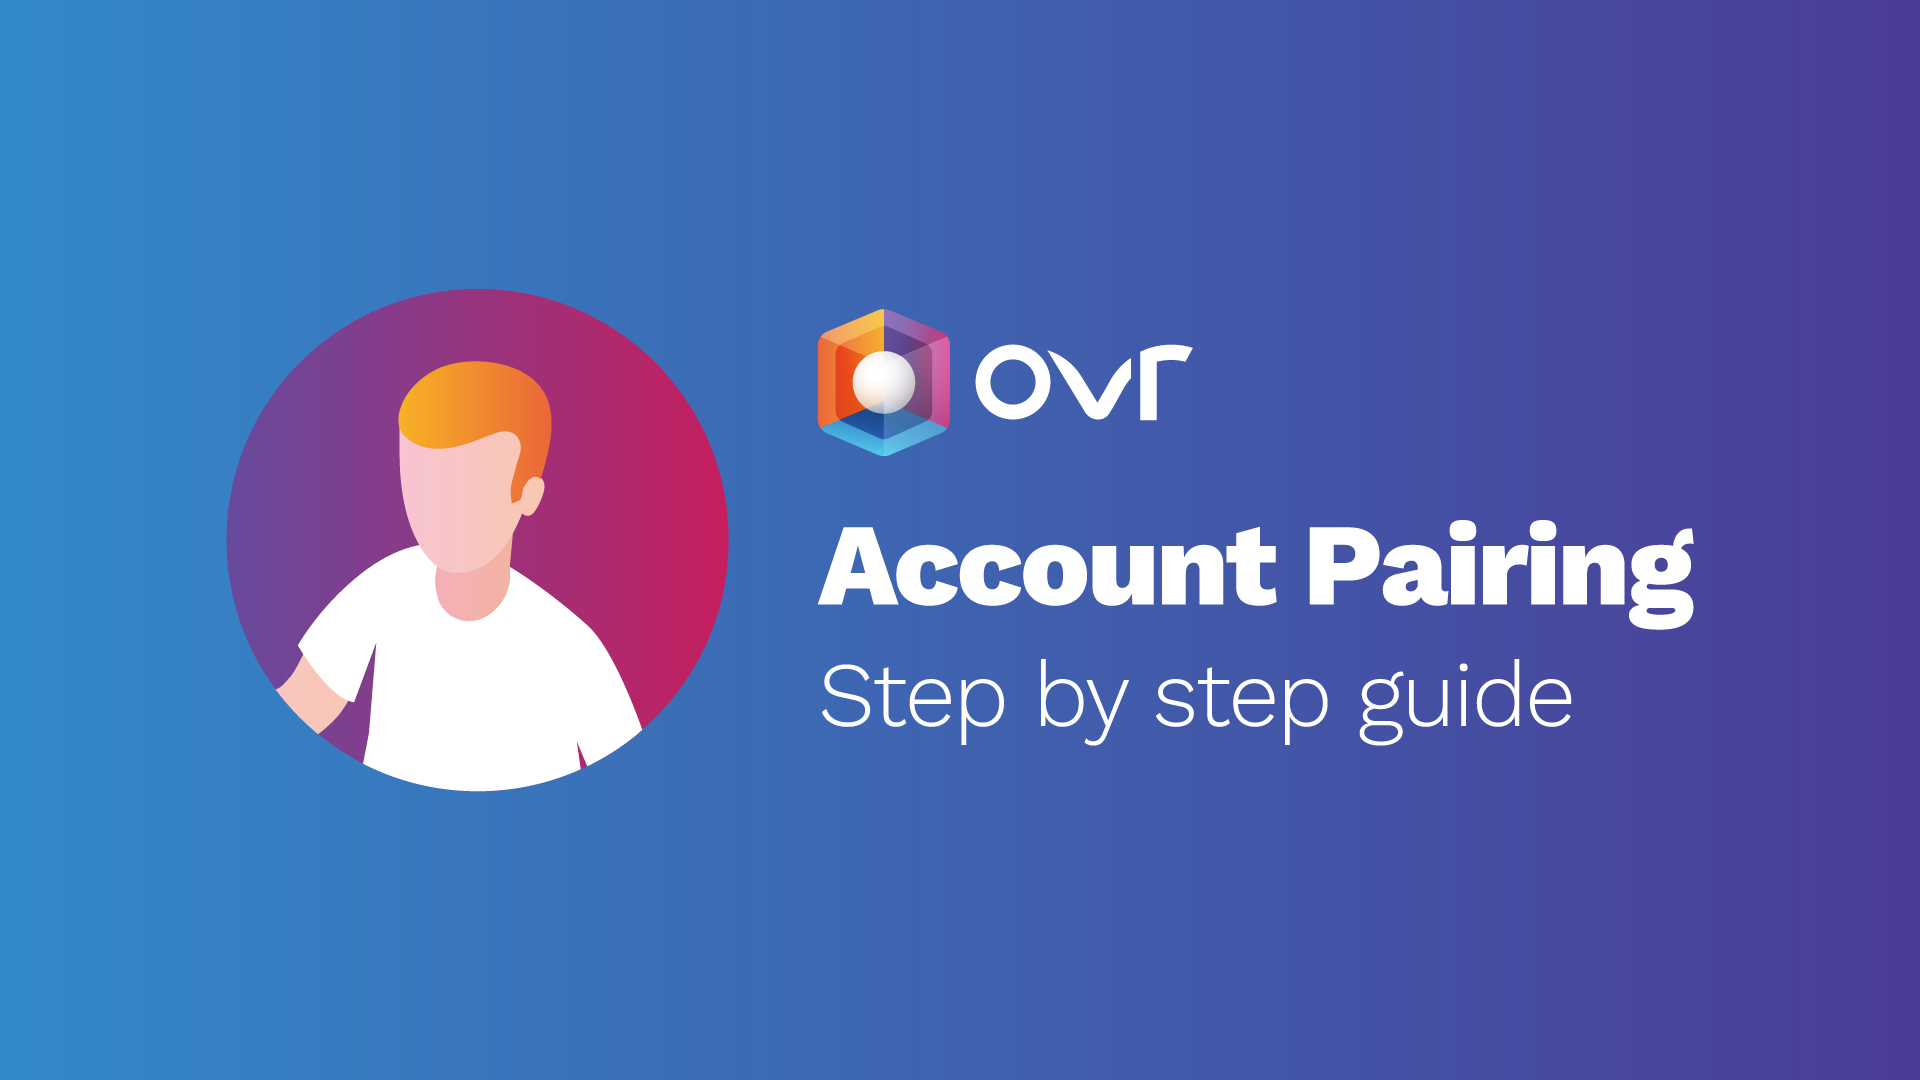 Five Simple Steps to Pair Your OVR App Account with Your OVR Marketplace Account